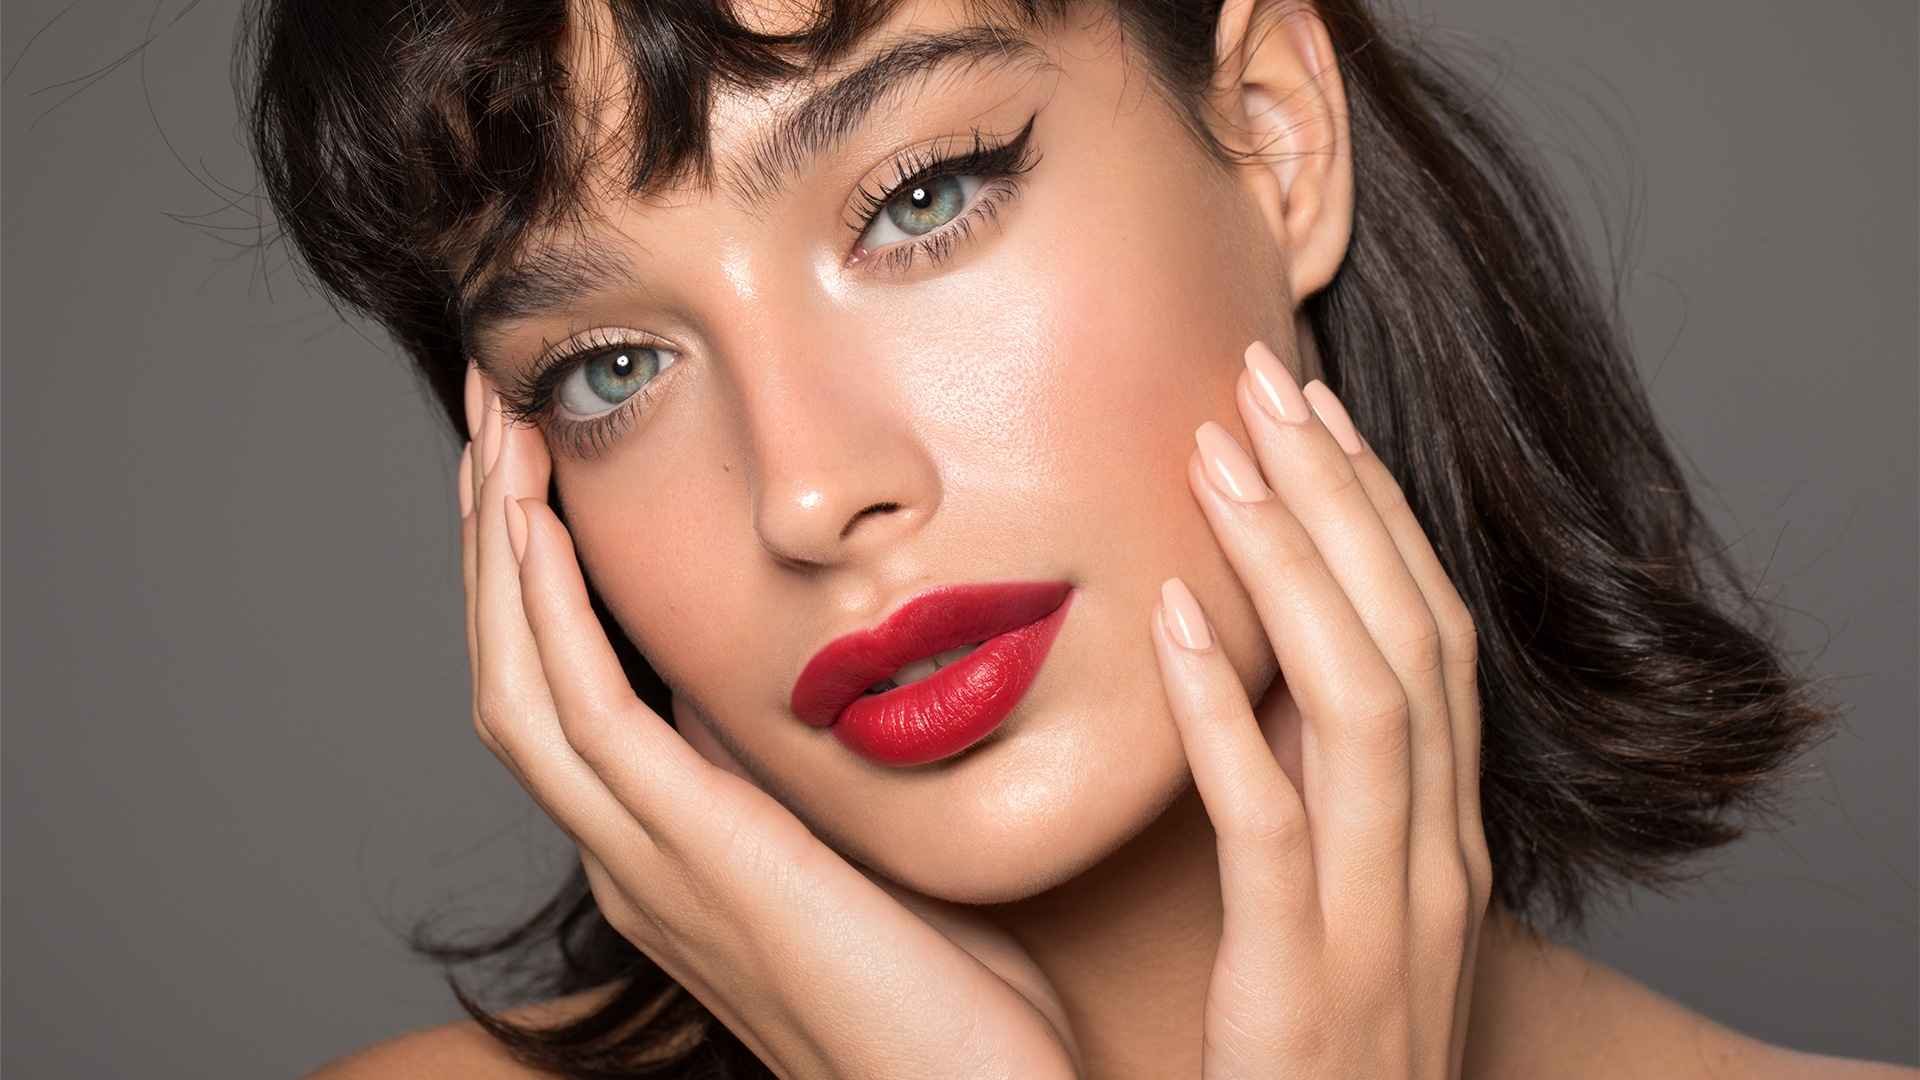 Makeup techniques and tips for natural looking skin